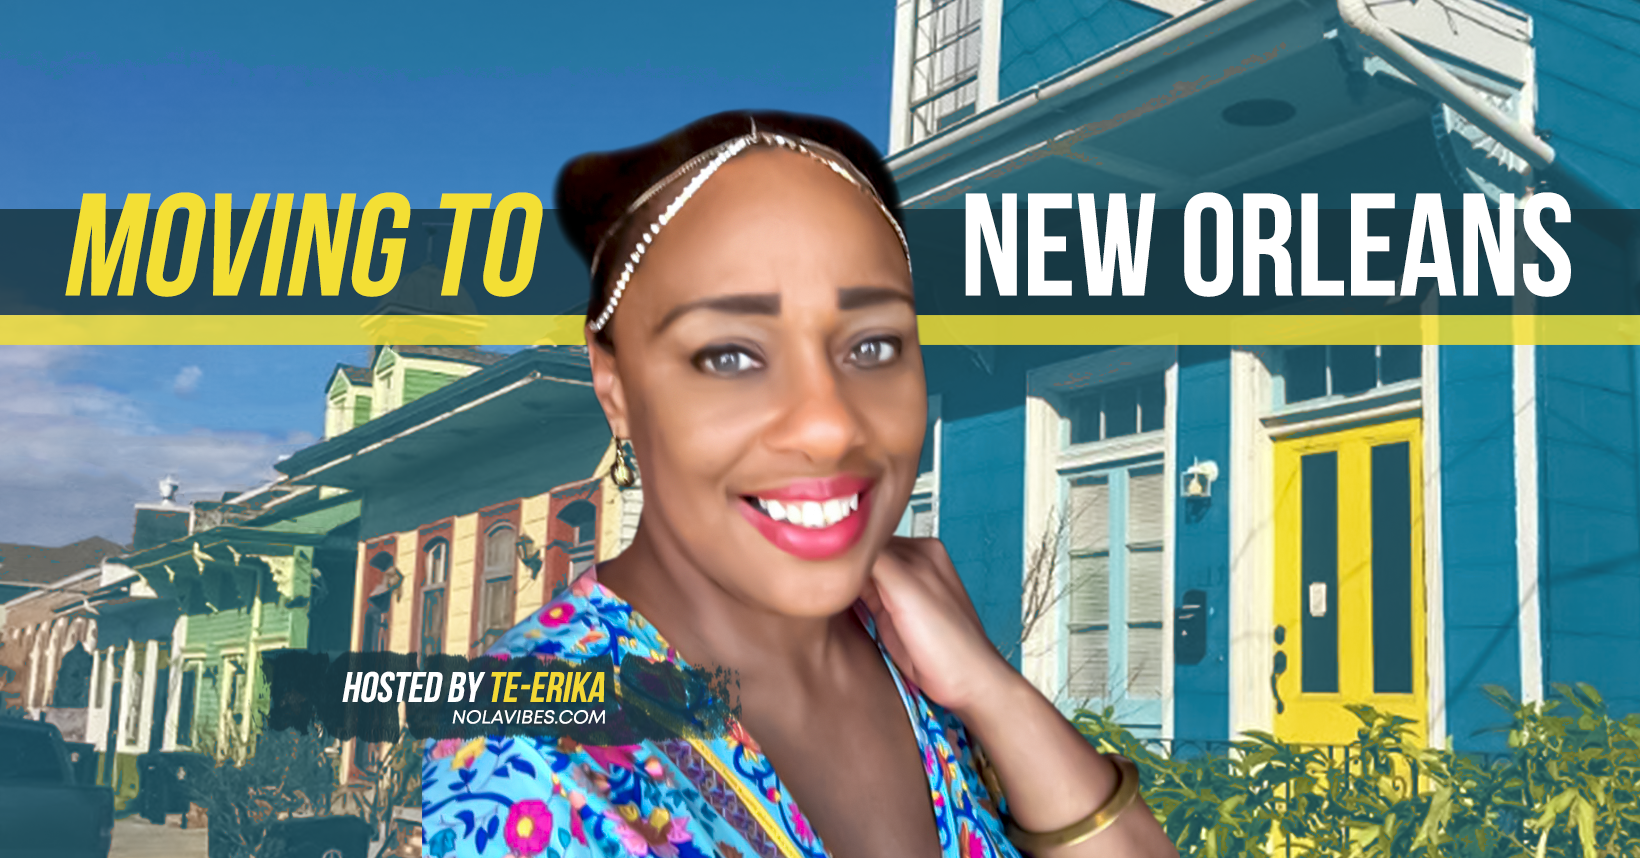 Moving to New Orleans TE-ERIKA